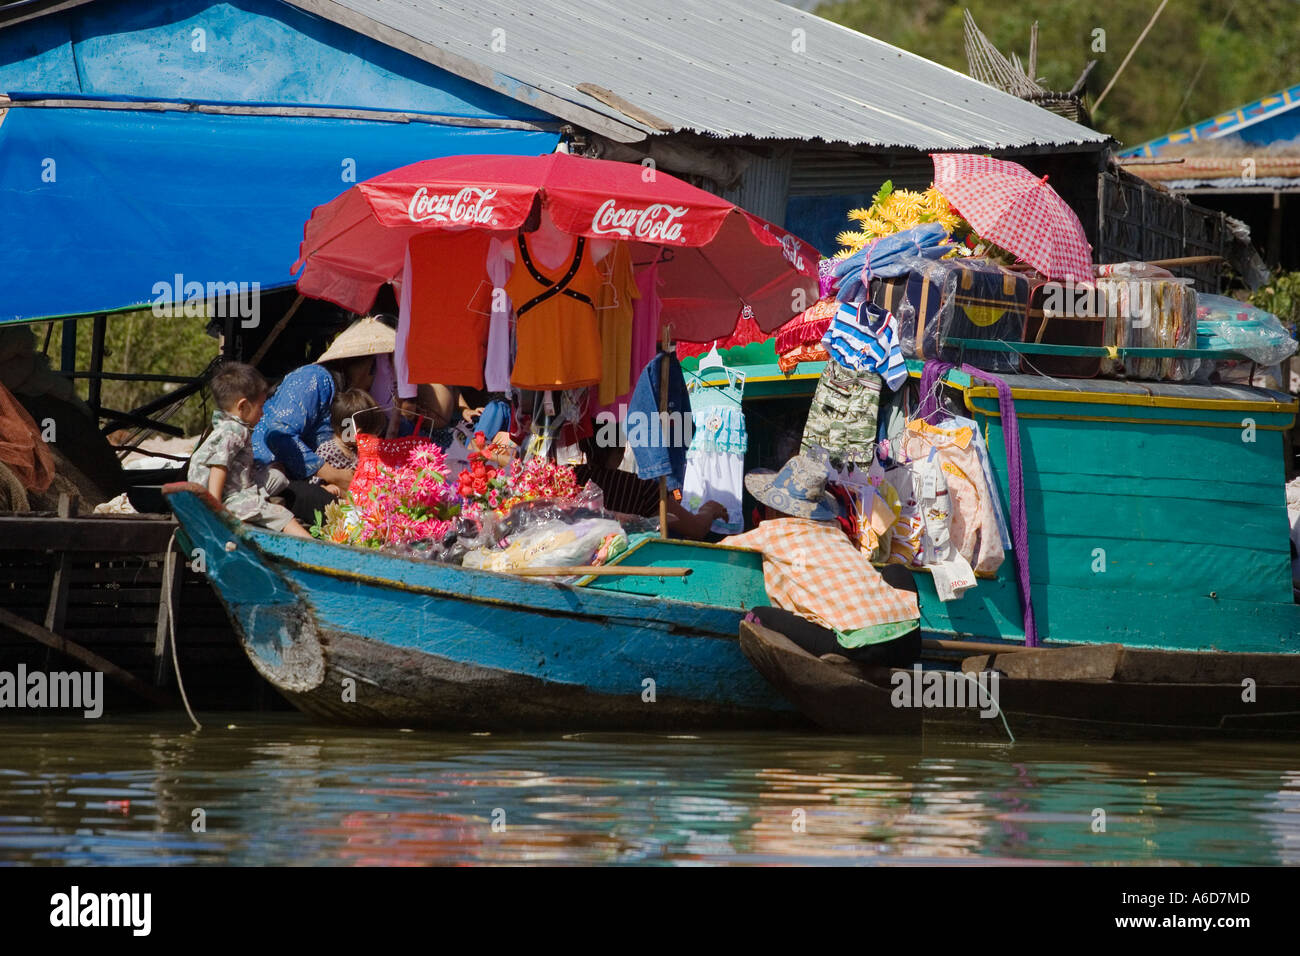 Merchant boat with Coca cola umbrella in the Vietnamese floating village of Chong Kneas lake Tonle Sap Siem Reap Cambodia Stock Photo